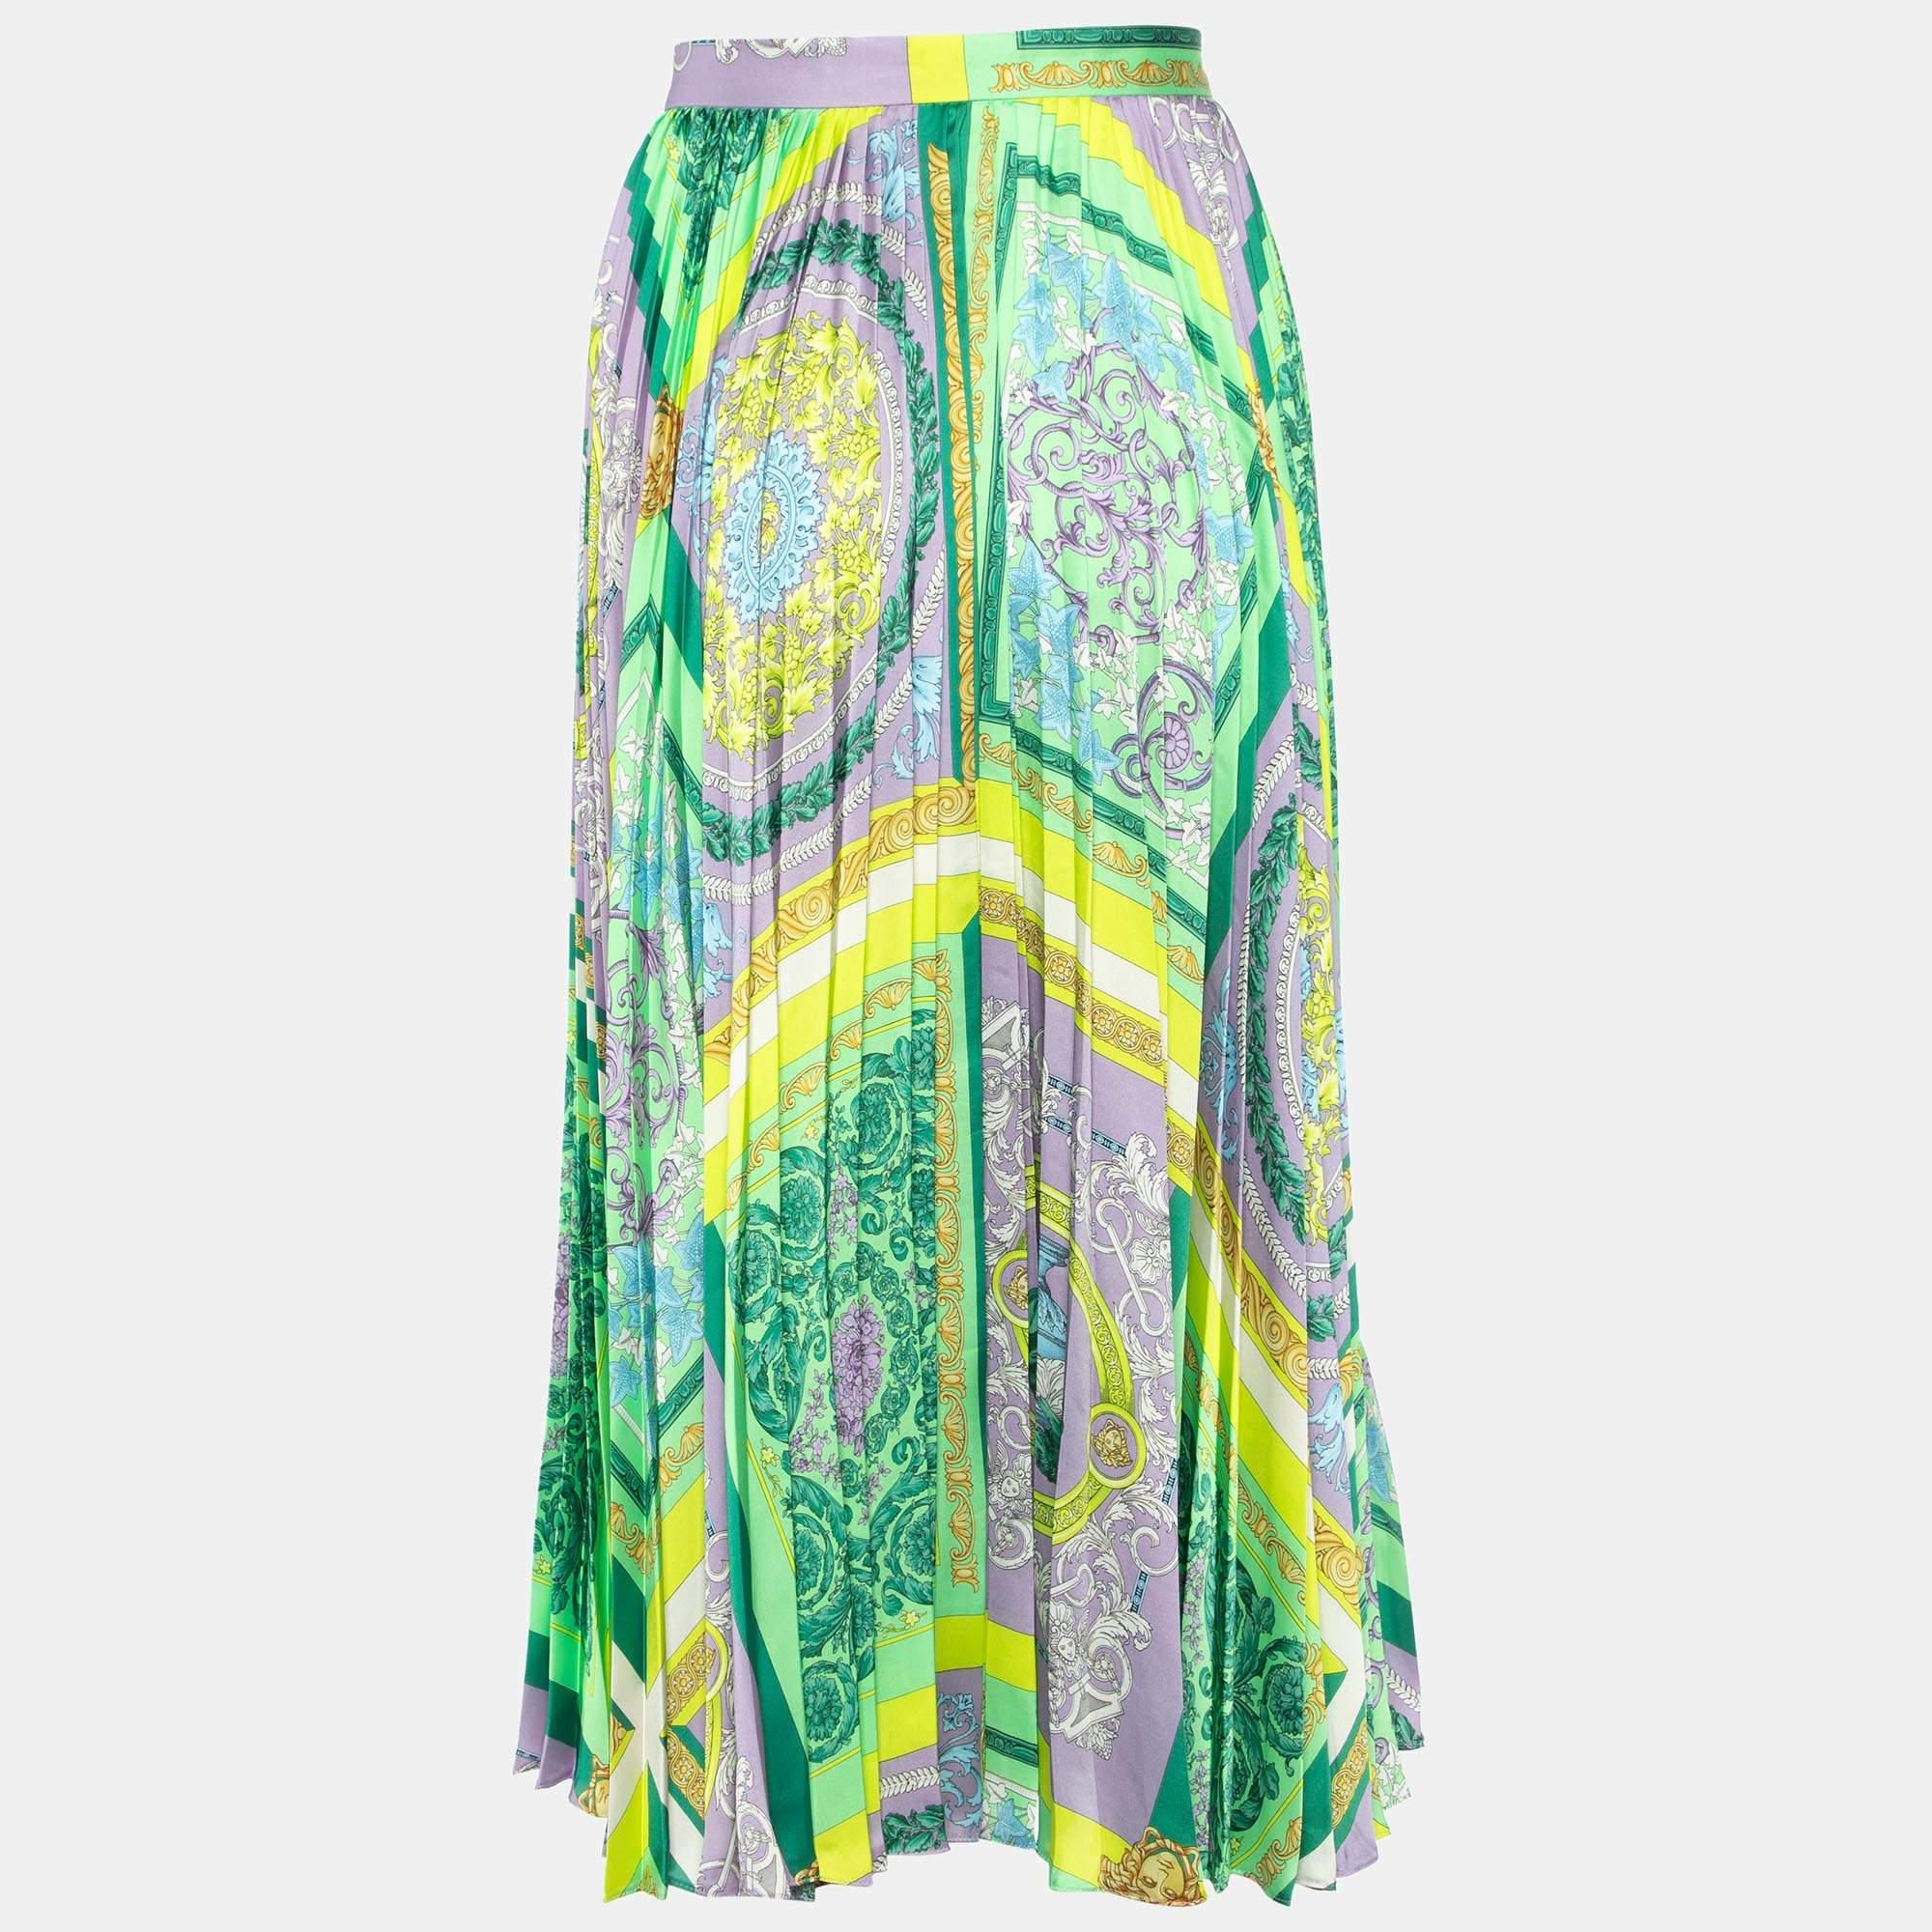 Indulge in the opulent allure of the Versace skirt. Crafted with meticulous detail, this luxurious piece features a mesmerizing mosaic print in vibrant green hues, complemented by elegant pleats, offering a sophisticated blend of style and allure.

